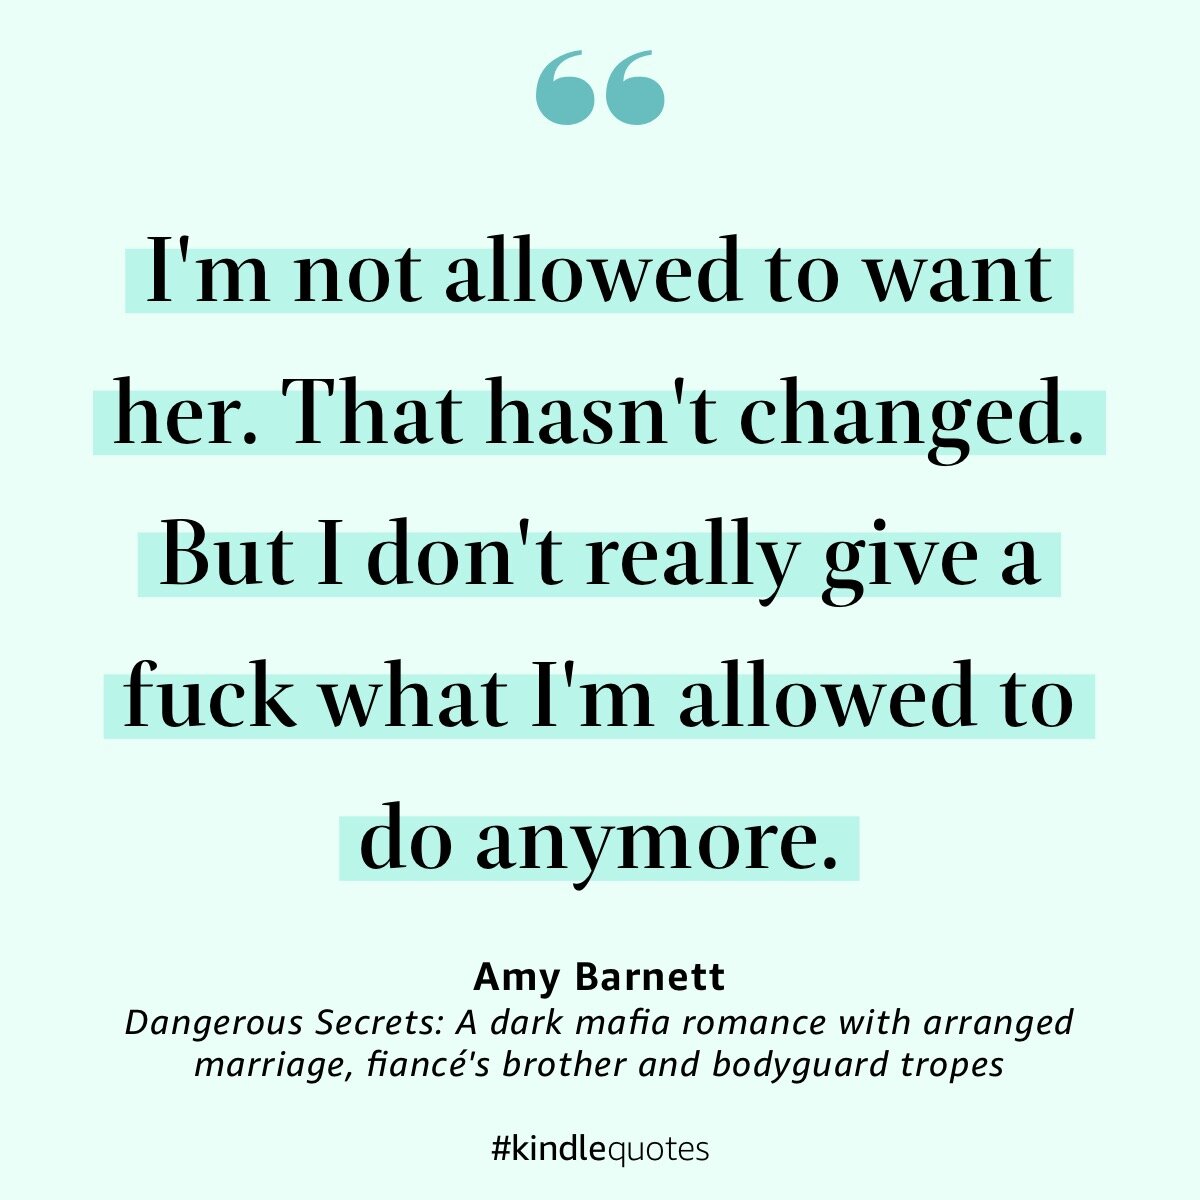 &quot;I'm not allowed to want her. That hasn't changed. But I don't really give a f**k what I'm allowed to do anymore.&quot;